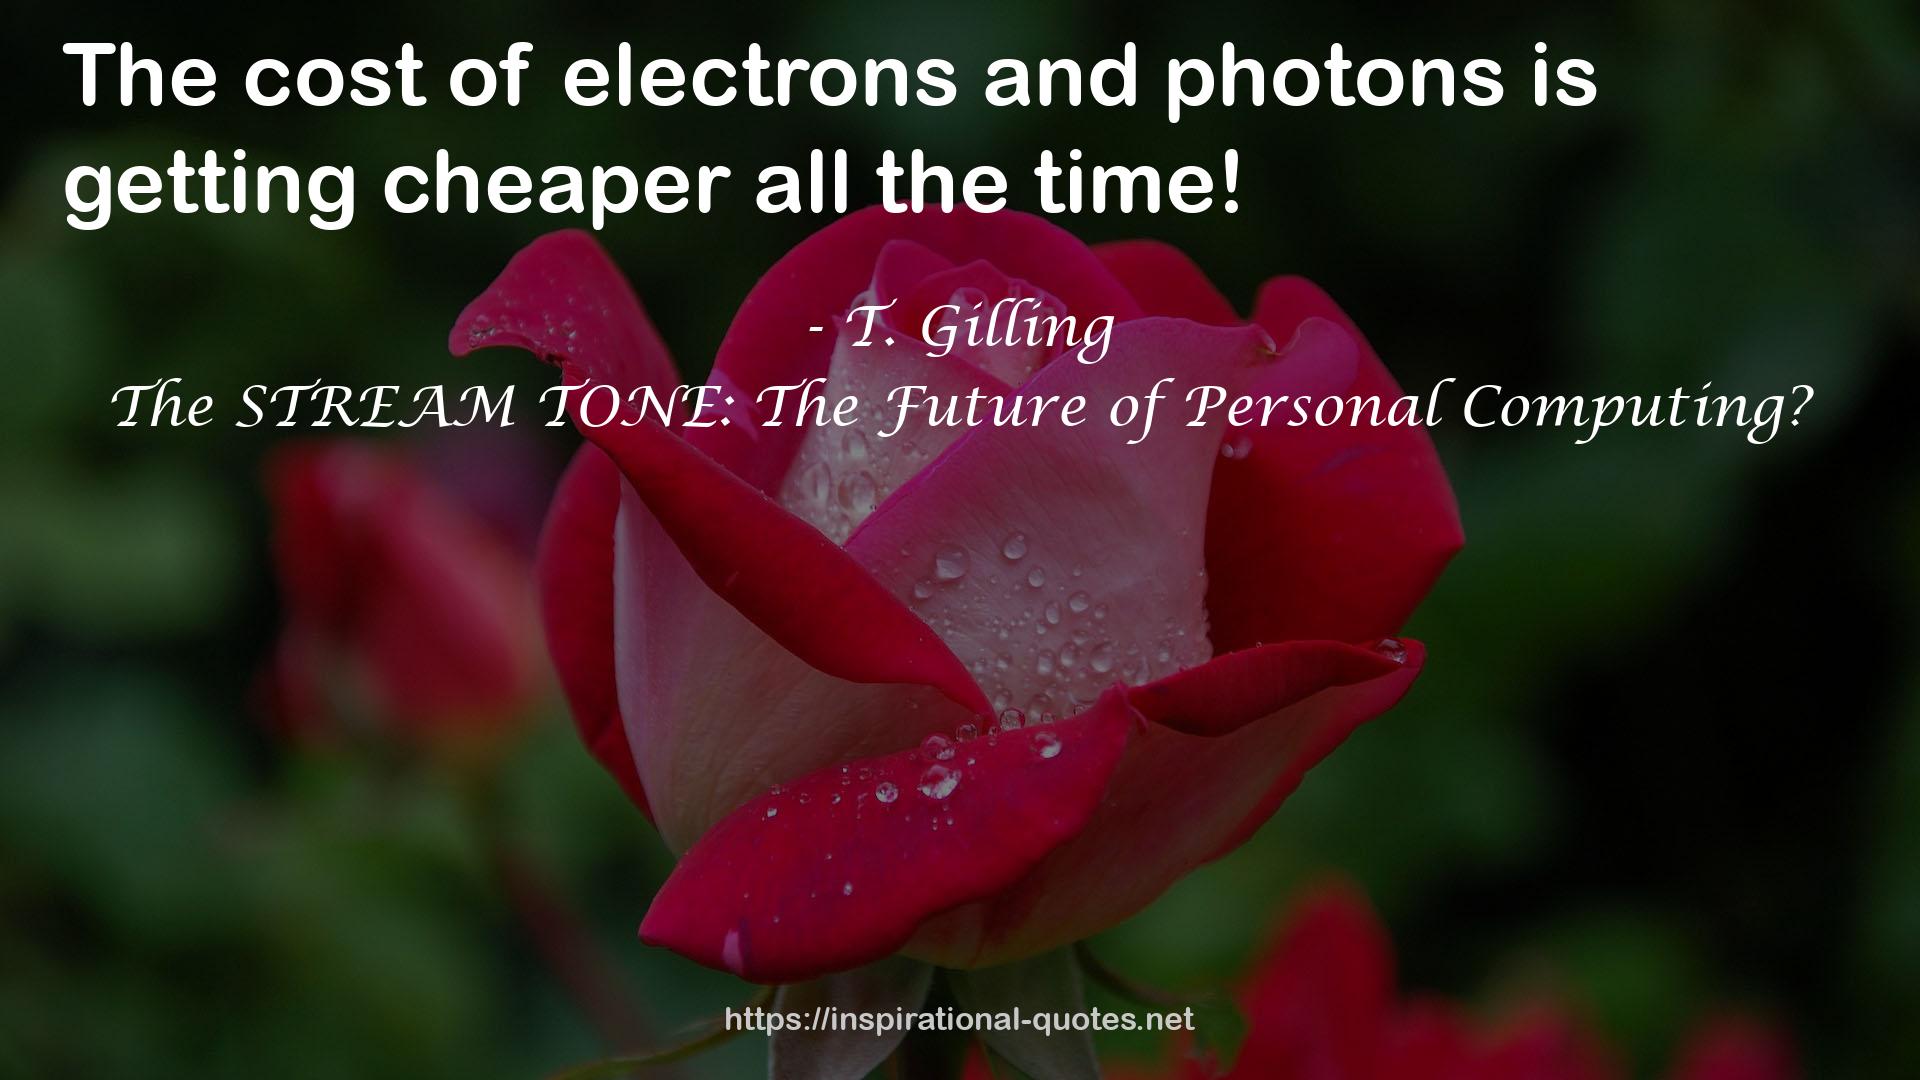 The STREAM TONE: The Future of Personal Computing? QUOTES